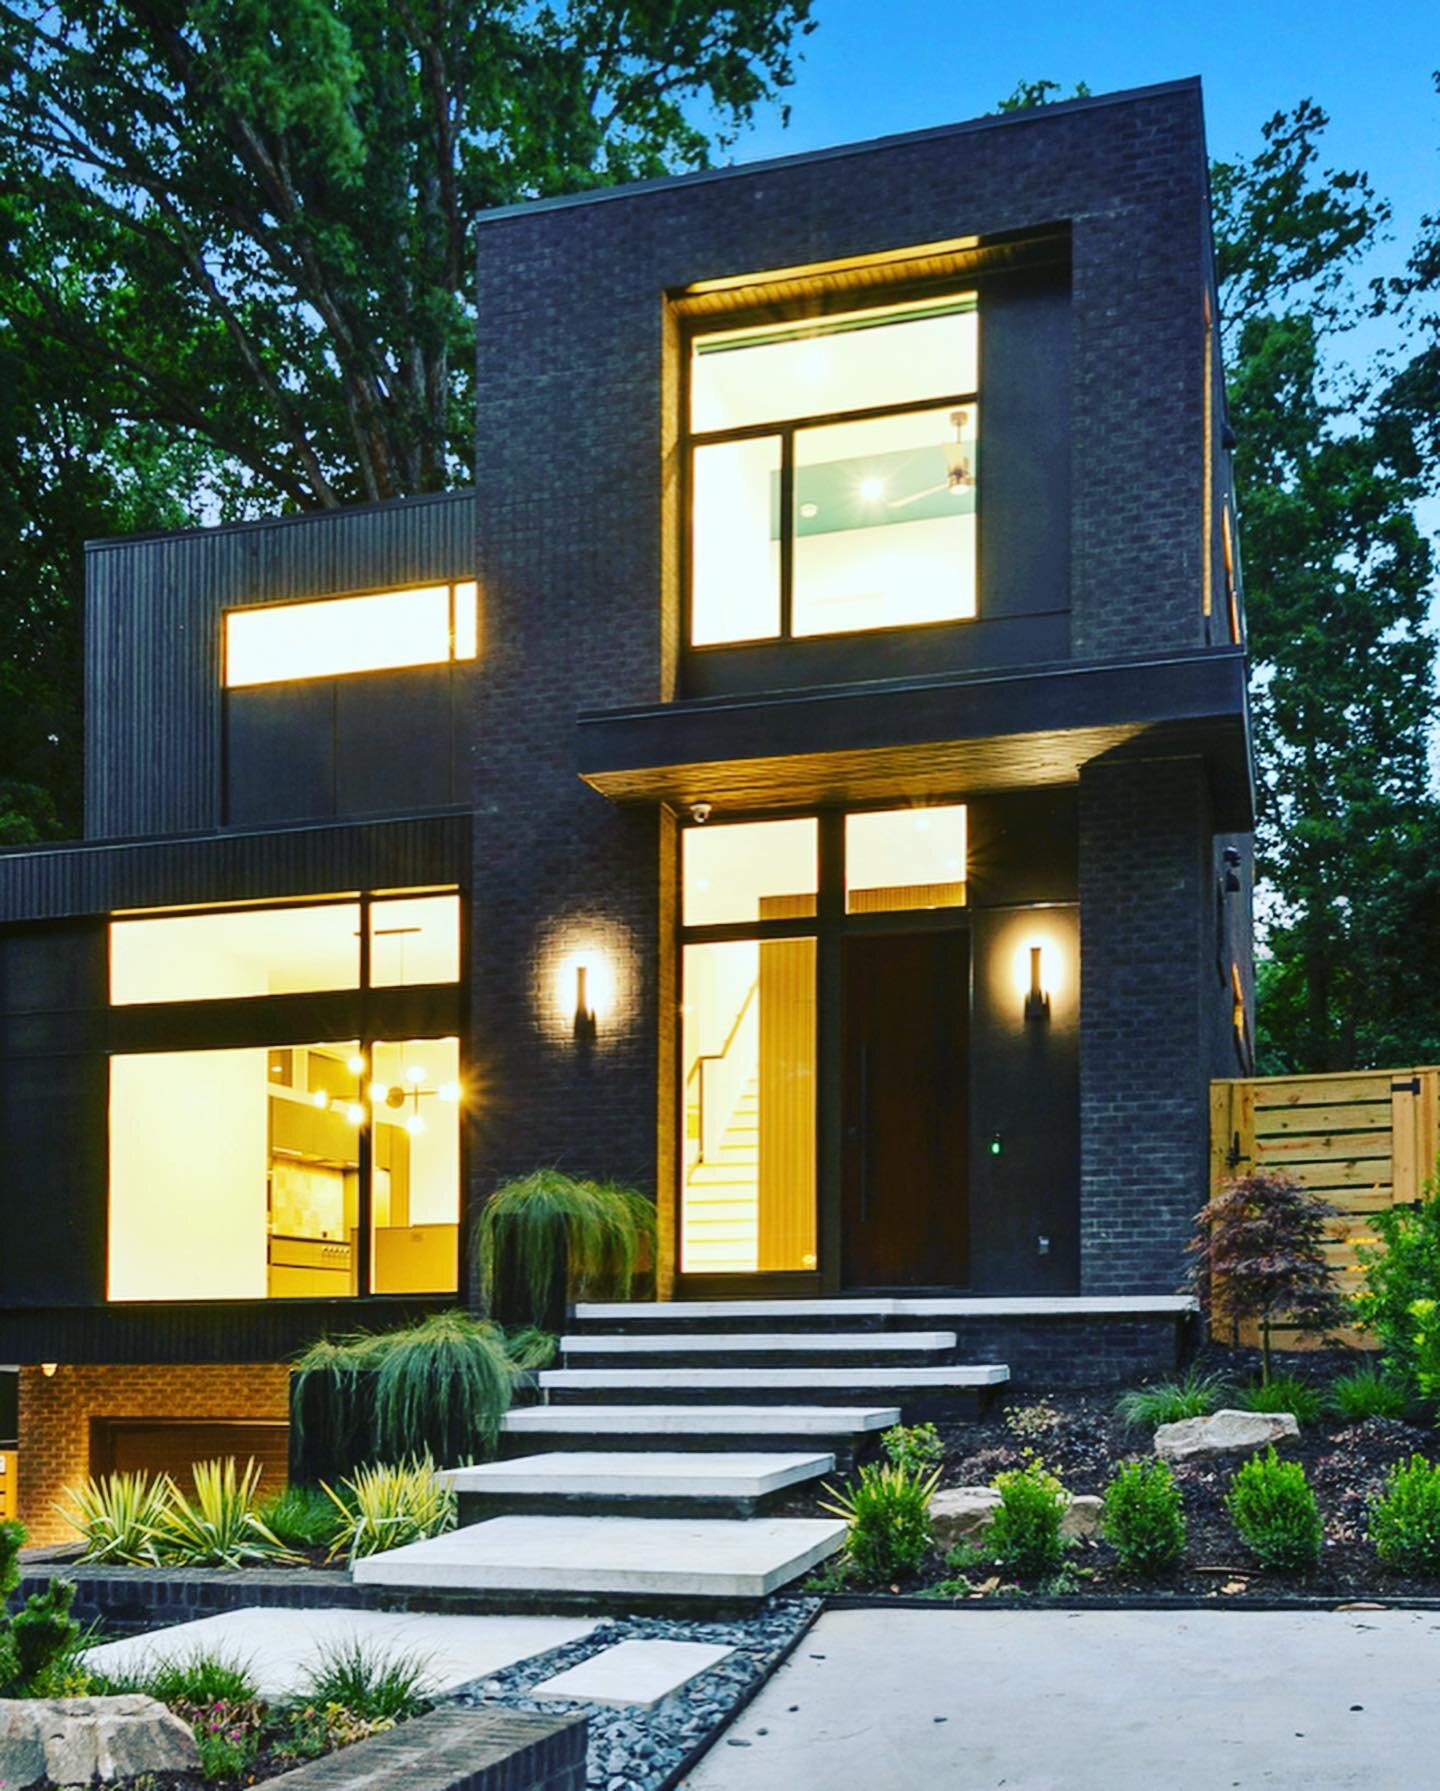 Evening shots of out latest build in Virginia Highlands&hellip; Custom build for an great customer&hellip; #custombuilder #custombuildingatlanta #modernatlanta